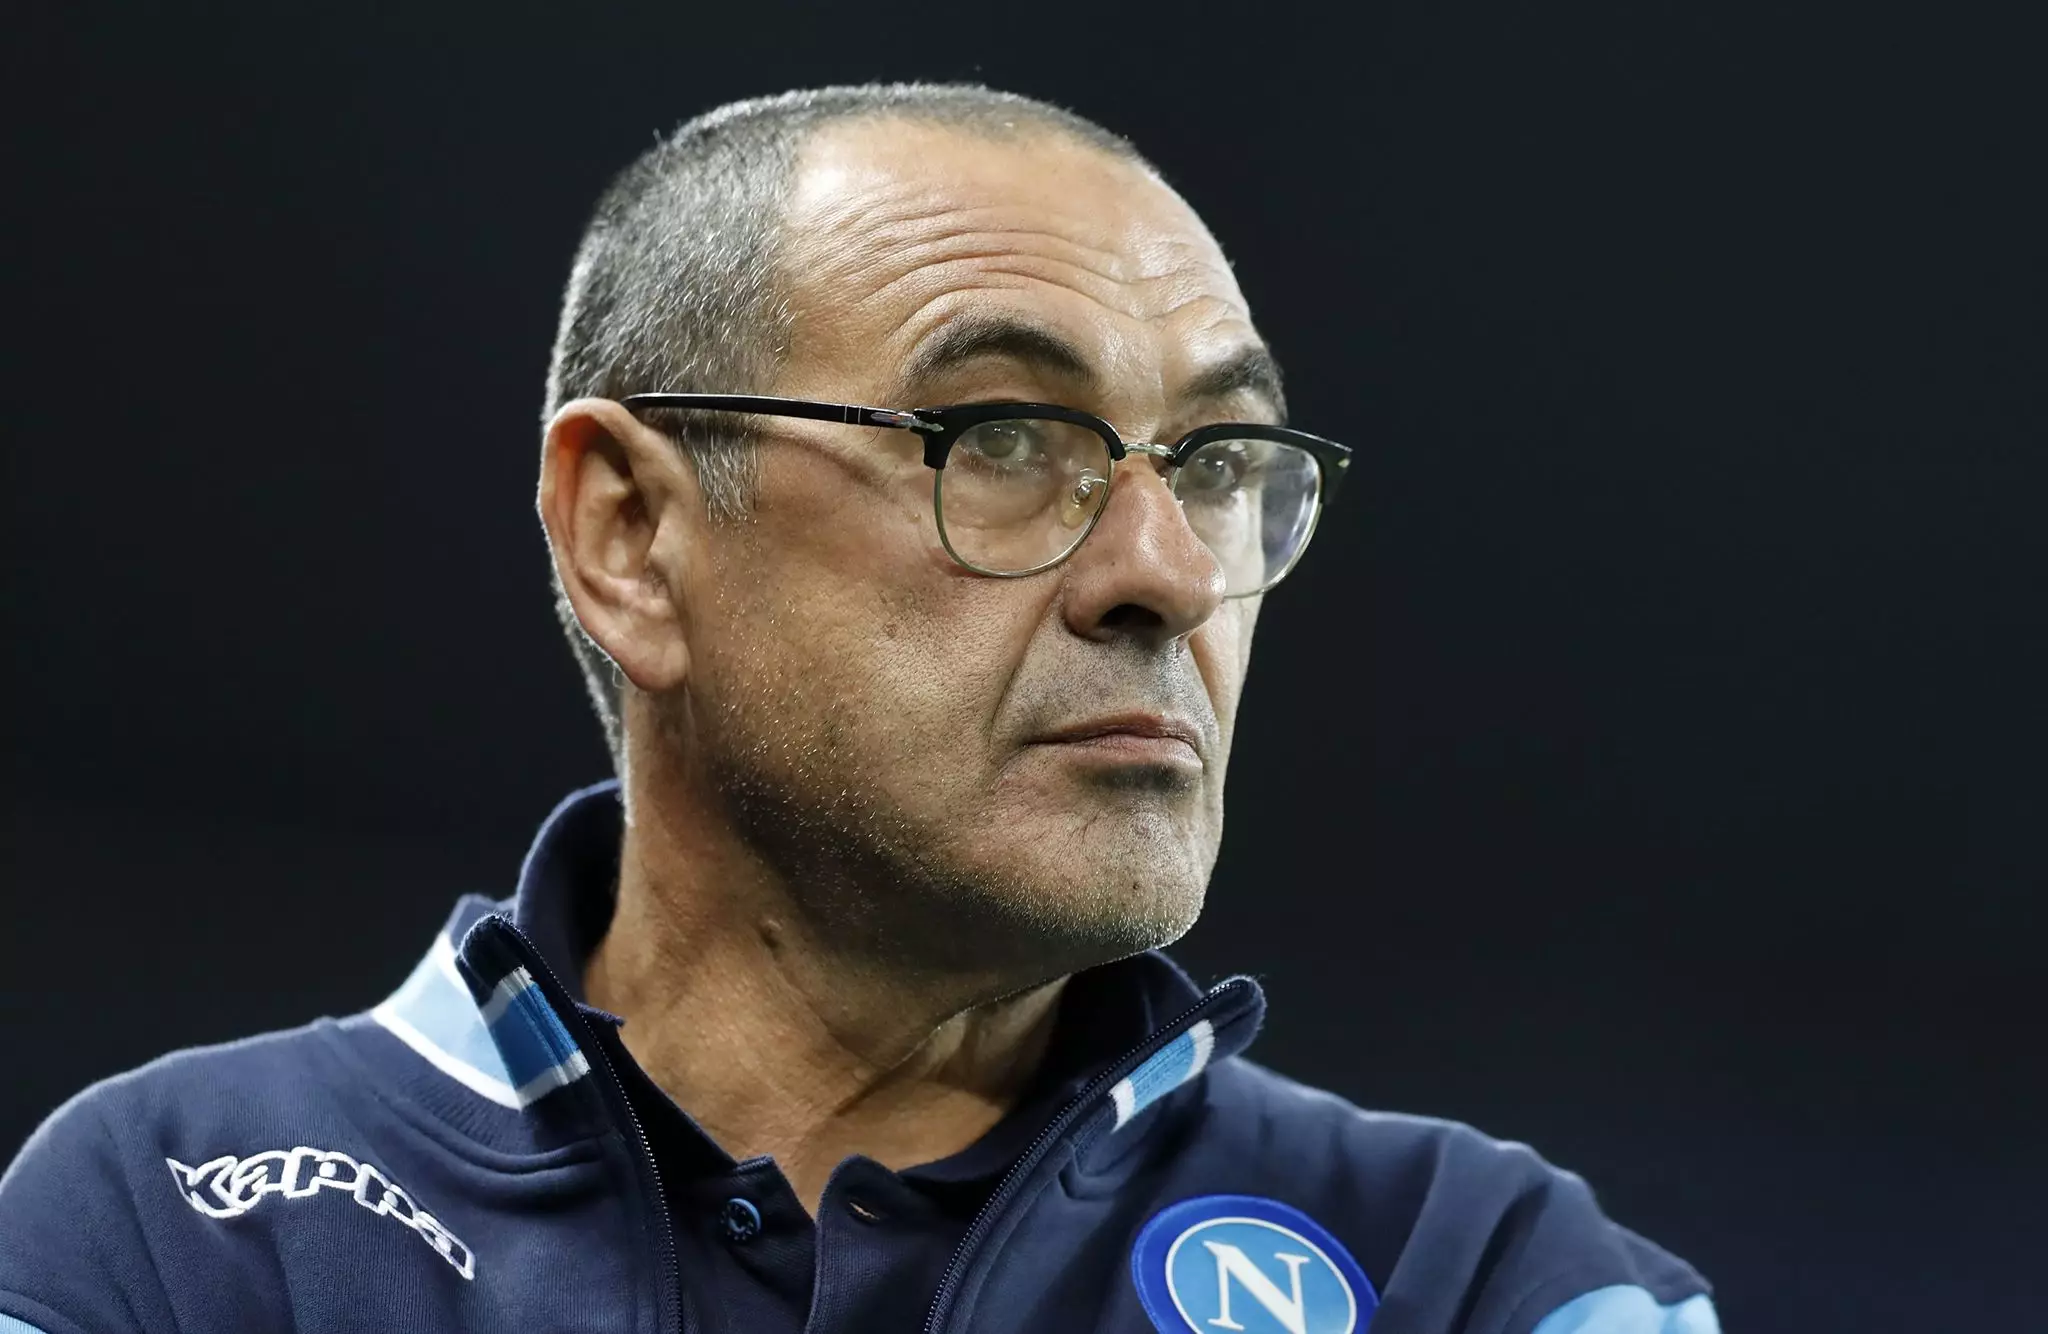 Sarri takes over from Conte after finishing second in Serie A last season. Image: PA Images